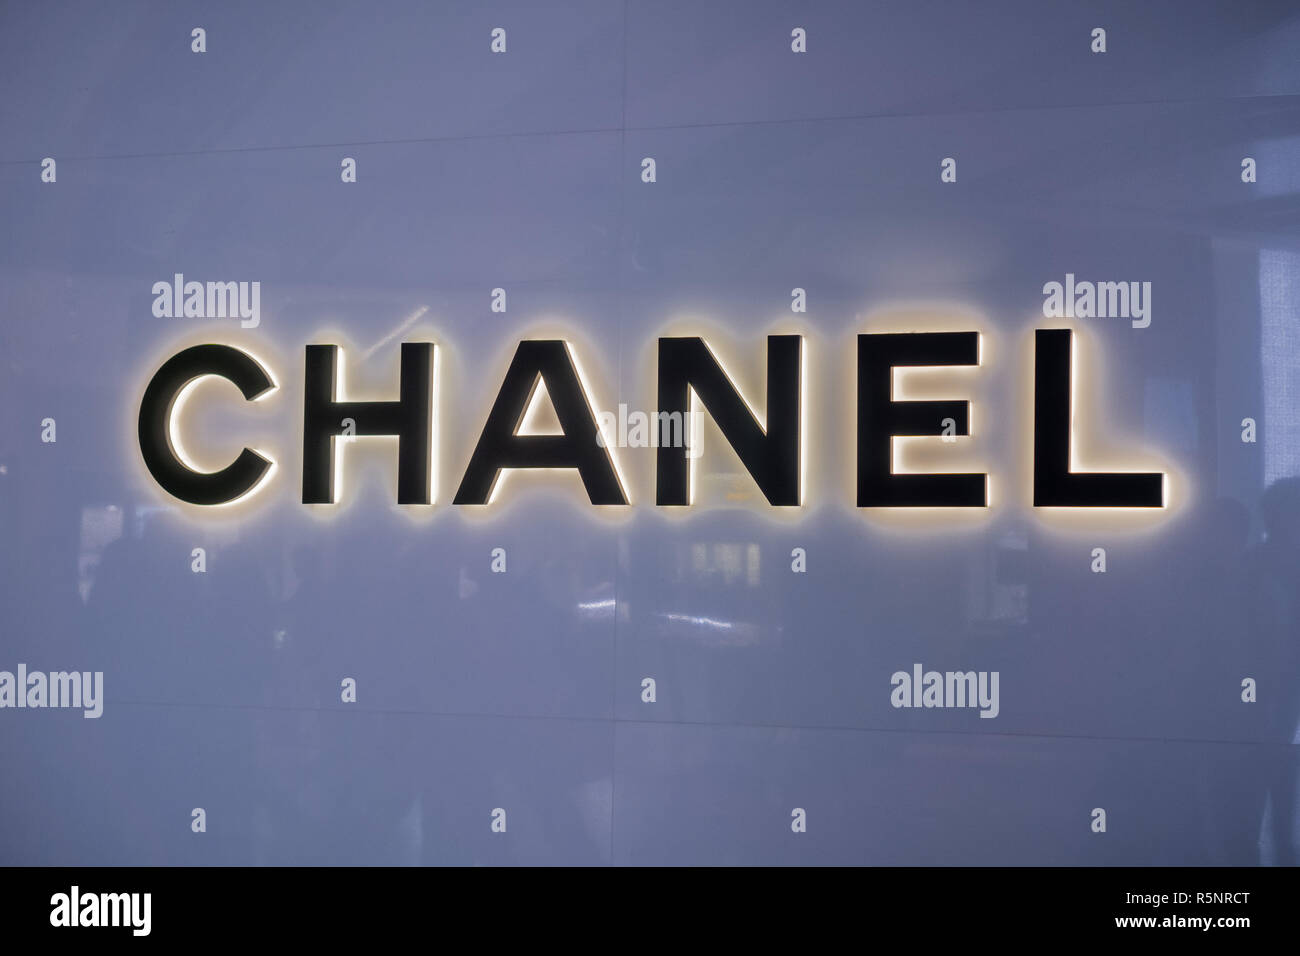 September 24, 2017 London/UK - Chanel logo at the store entrance at Heathrow airport Stock Photo